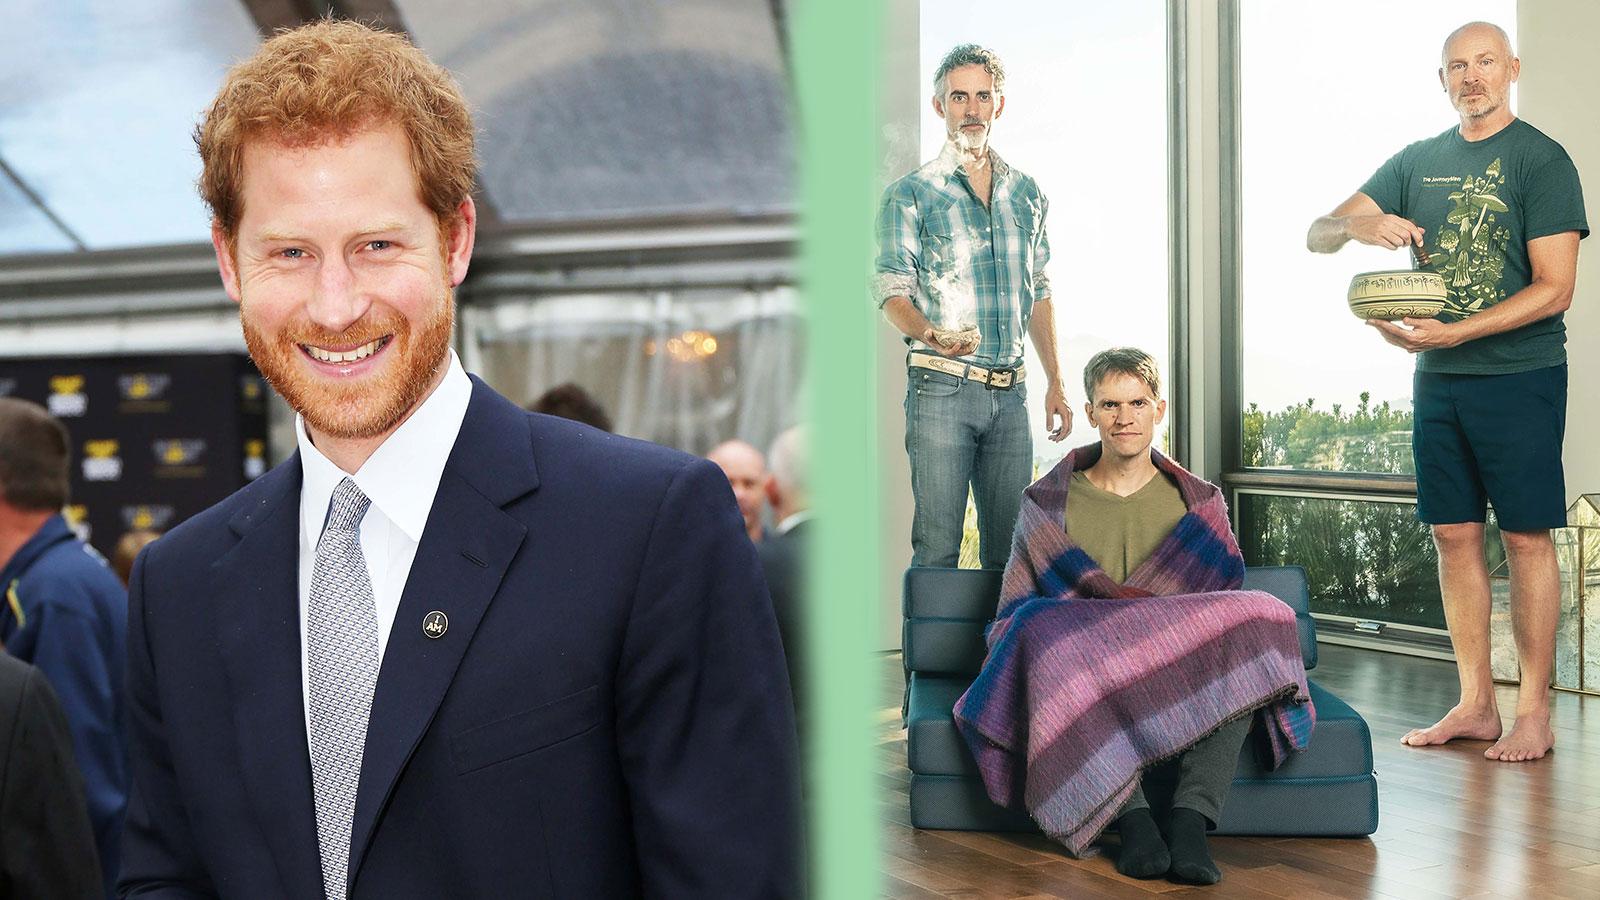 Prince Harry Opens Up About How Ayahuasca Helped Him Heal After Losing His Mom